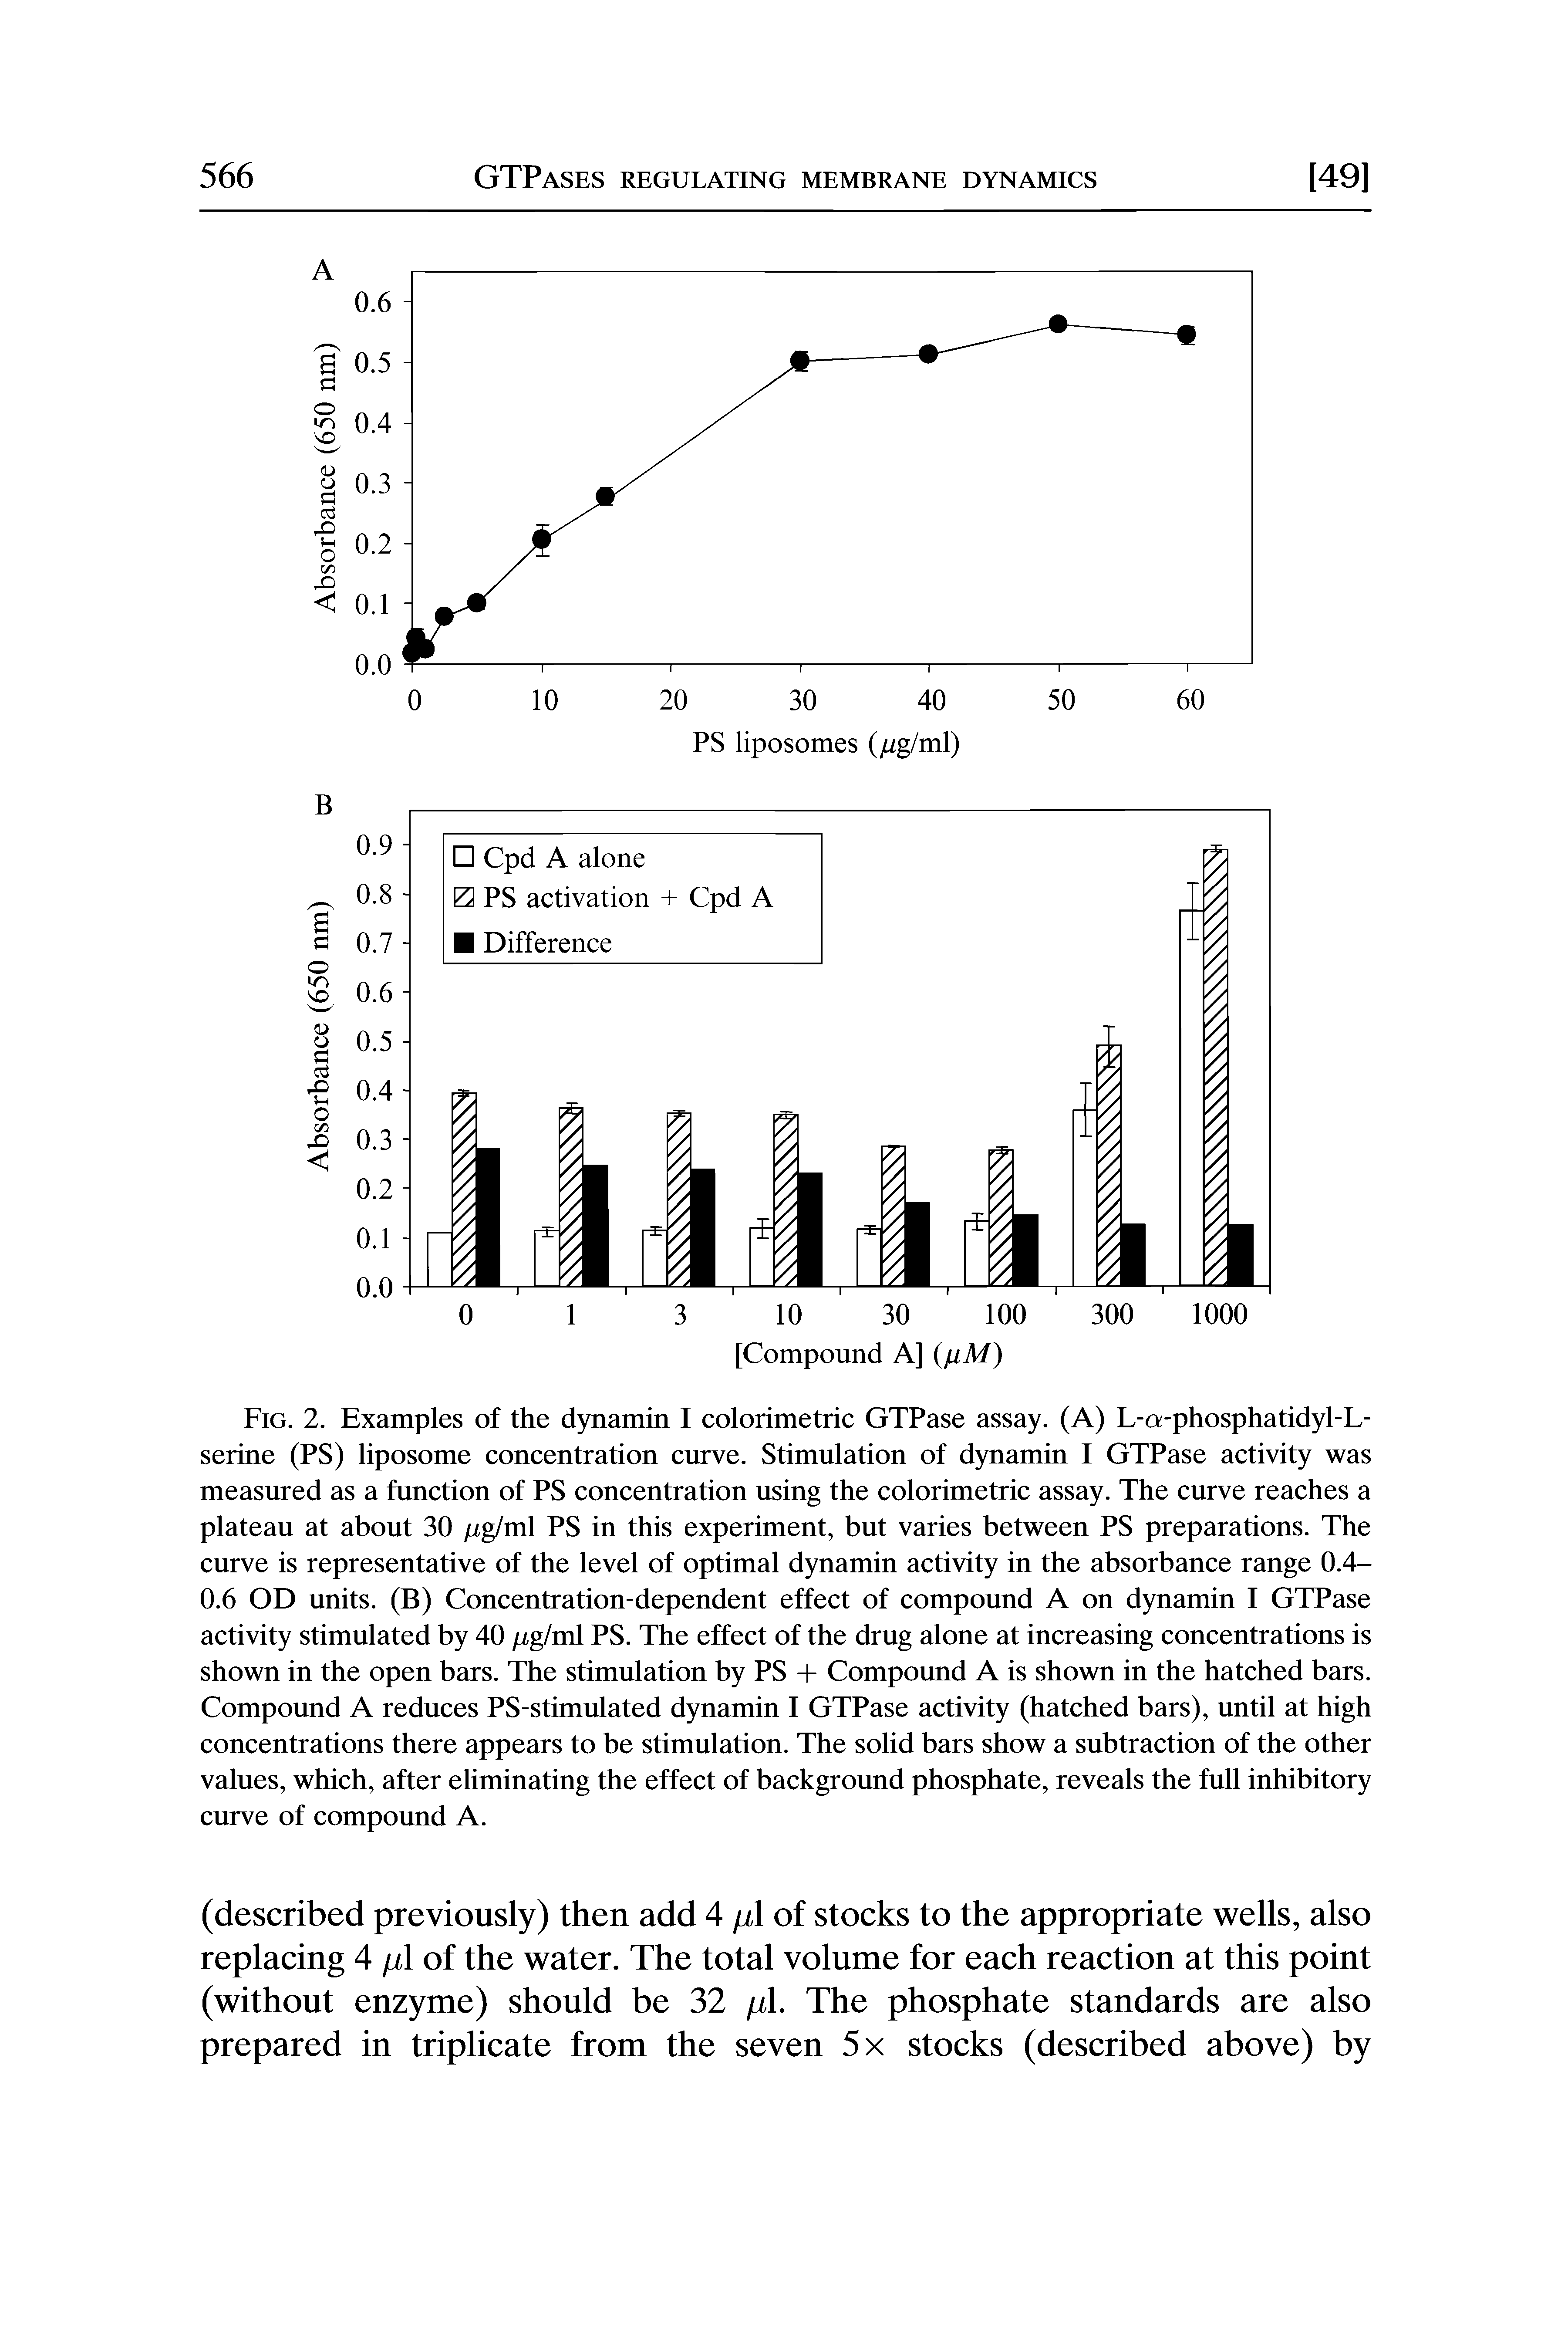 Fig. 2. Examples of the dynamin I colorimetric GTPase assay. (A) L-a-phosphatidyl-L-serine (PS) liposome concentration curve. Stimulation of dynamin I GTPase activity was measured as a function of PS concentration using the colorimetric assay. The curve reaches a plateau at about 30 /xg/ml PS in this experiment, but varies between PS preparations. The curve is representative of the level of optimal dynamin activity in the absorbance range 0.4-0.6 OD units. (B) Concentration-dependent effect of compound A on dynamin I GTPase activity stimulated by 40 /xg/ml PS. The effect of the drug alone at increasing concentrations is shown in the open bars. The stimulation by PS + Compound A is shown in the hatched bars. Compound A reduces PS-stimulated dynamin I GTPase activity (hatched bars), until at high concentrations there appears to be stimulation. The solid bars show a subtraction of the other values, which, after eliminating the effect of background phosphate, reveals the full inhibitory curve of compound A.